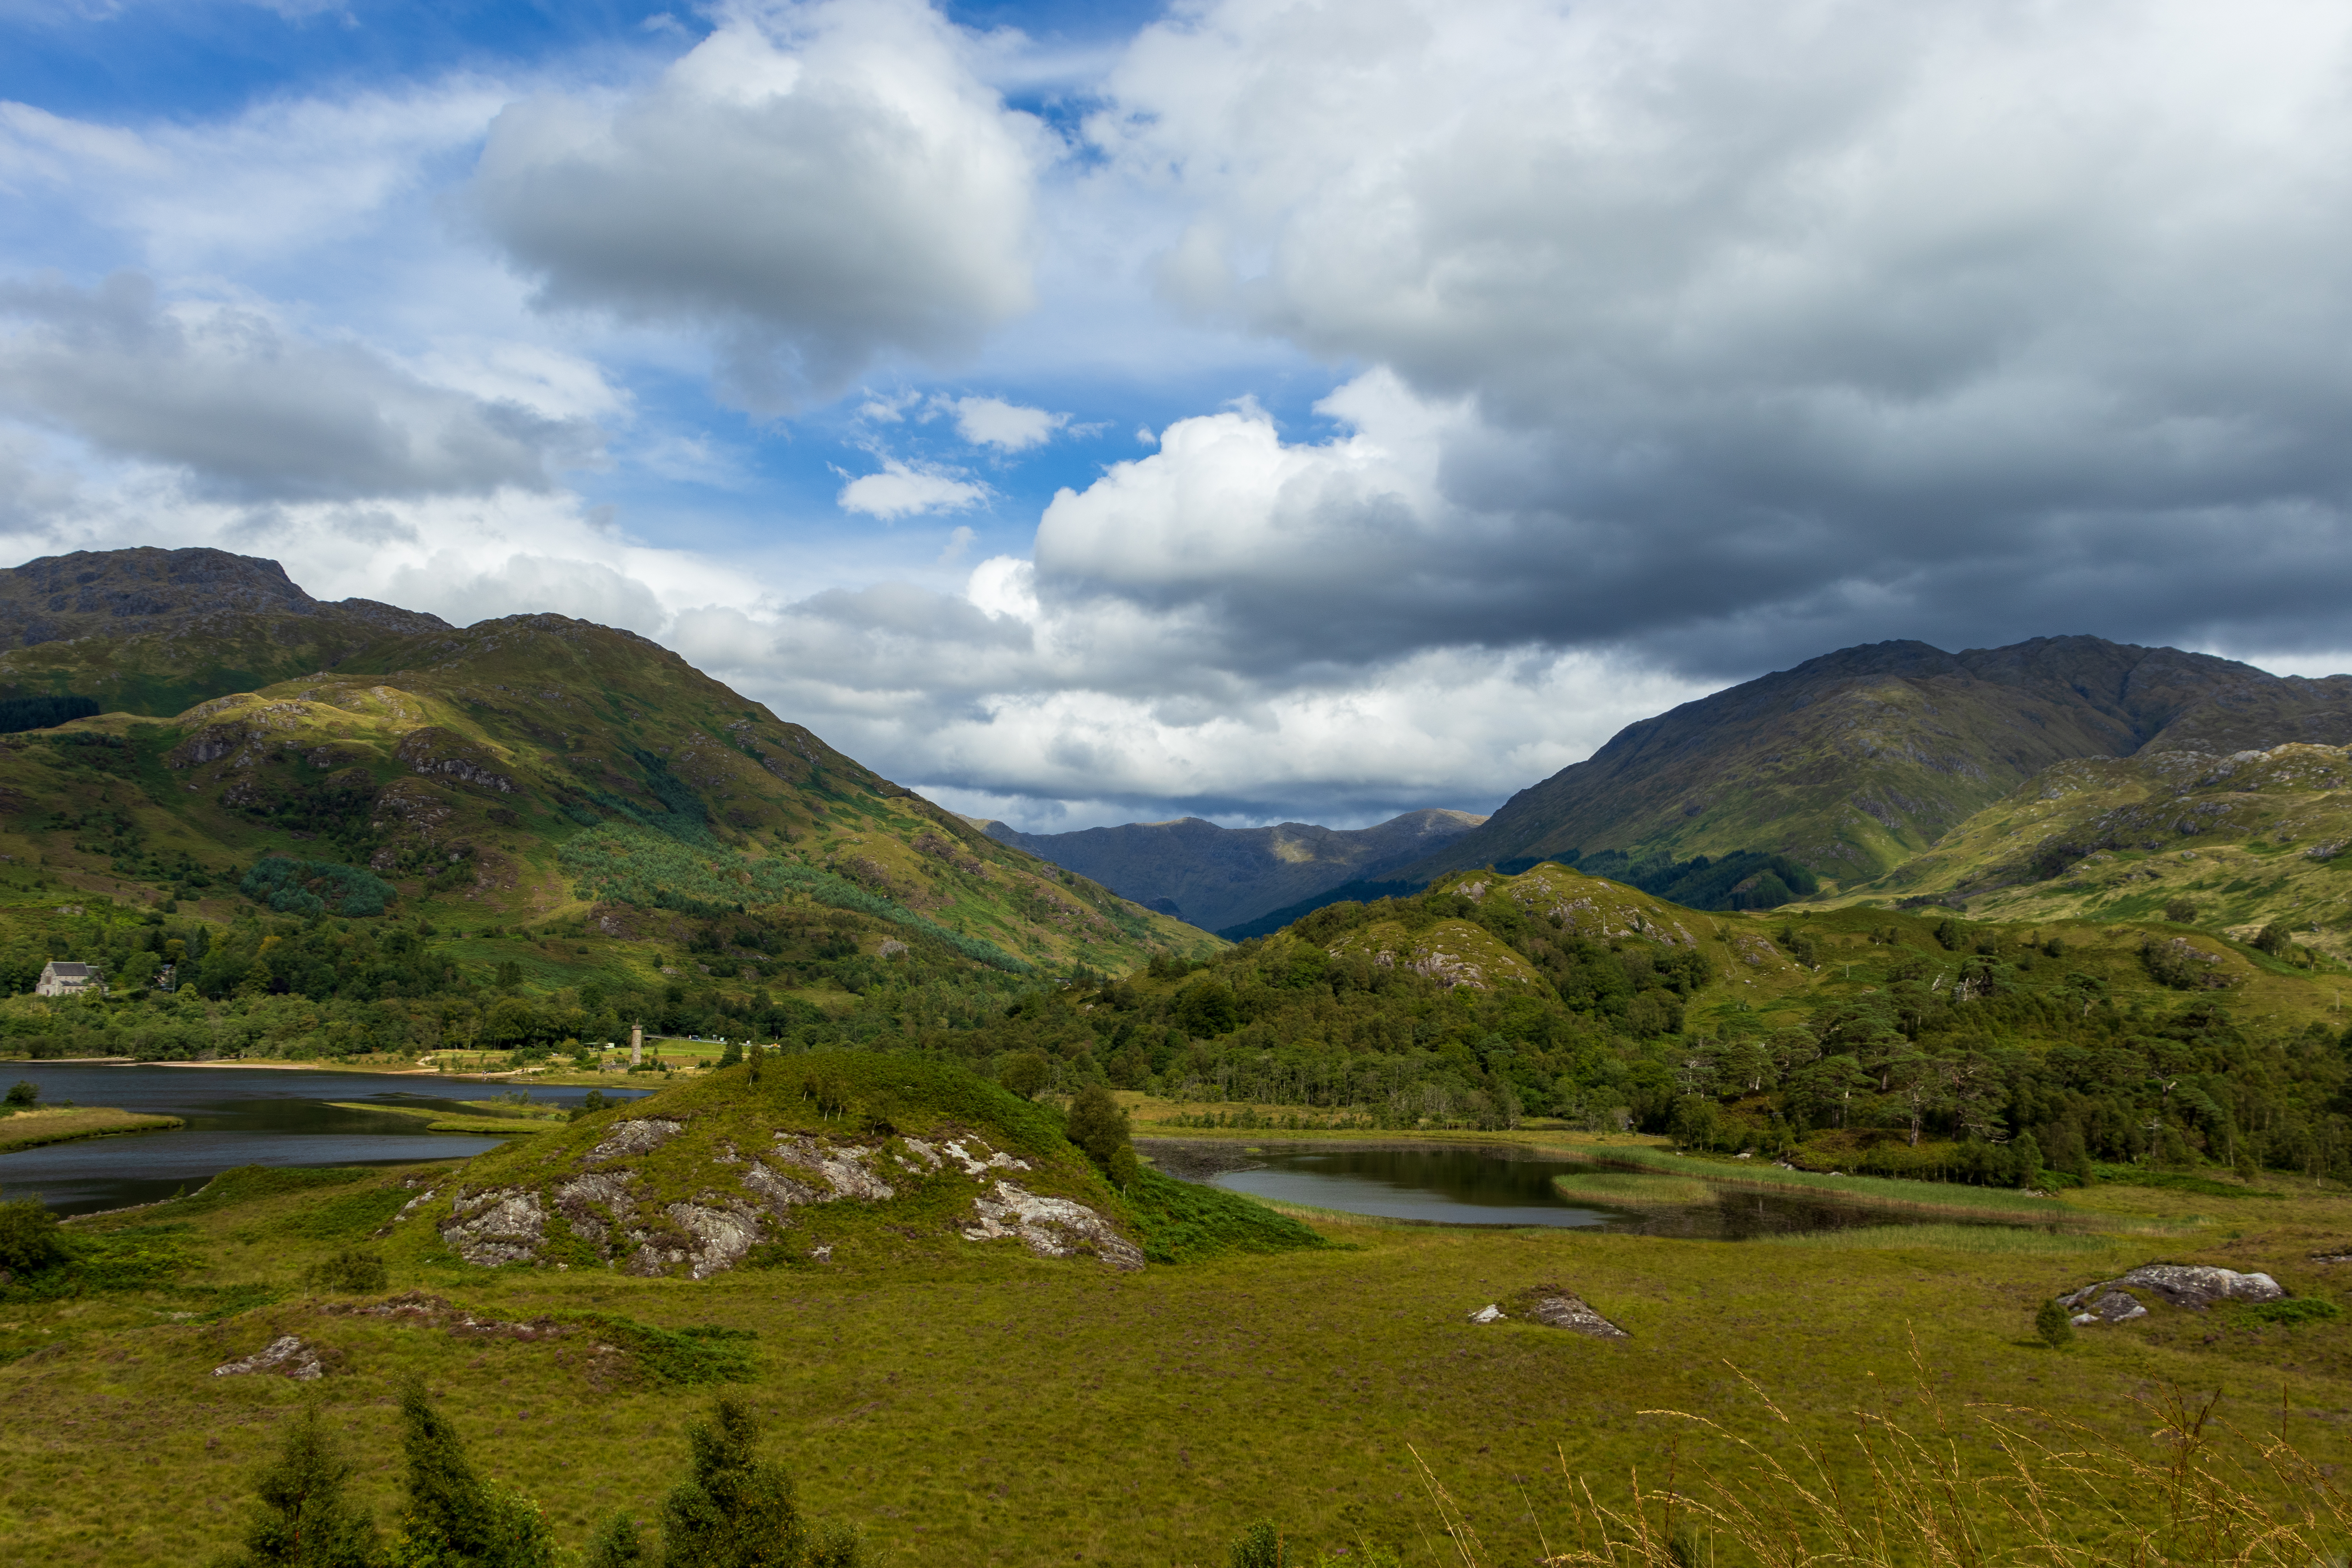 Photograph of view over area of Glenfinnan